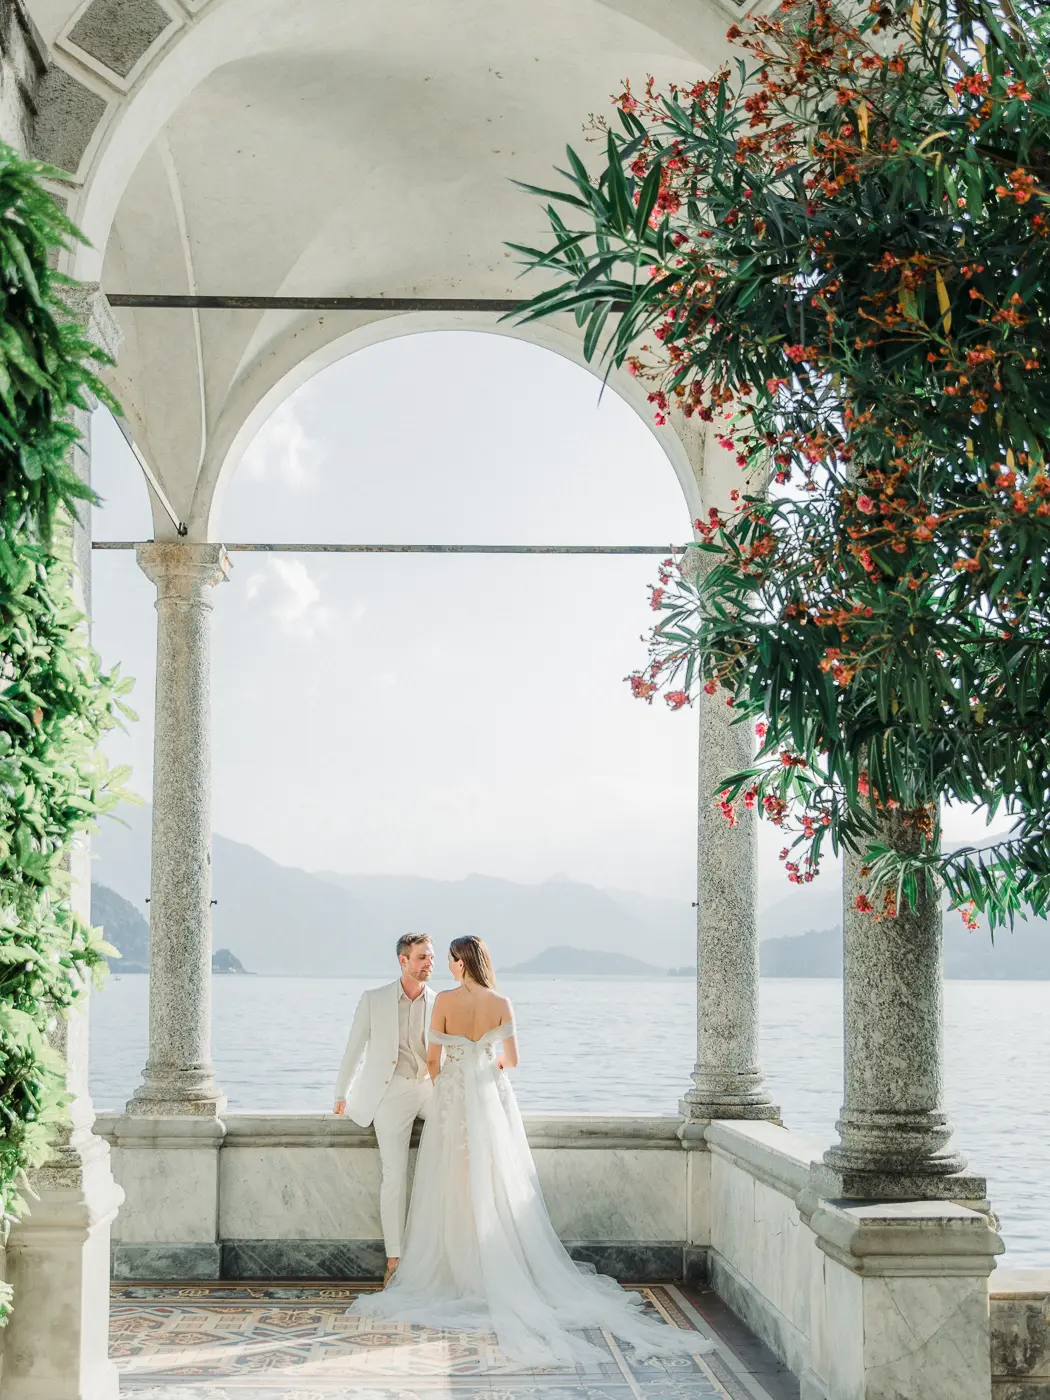 Breathtaking Italian destination wedding at Lake Como, showcasing the bride's flowing gown and the groom's classic suit against the scenic landscape of Villa Monastero